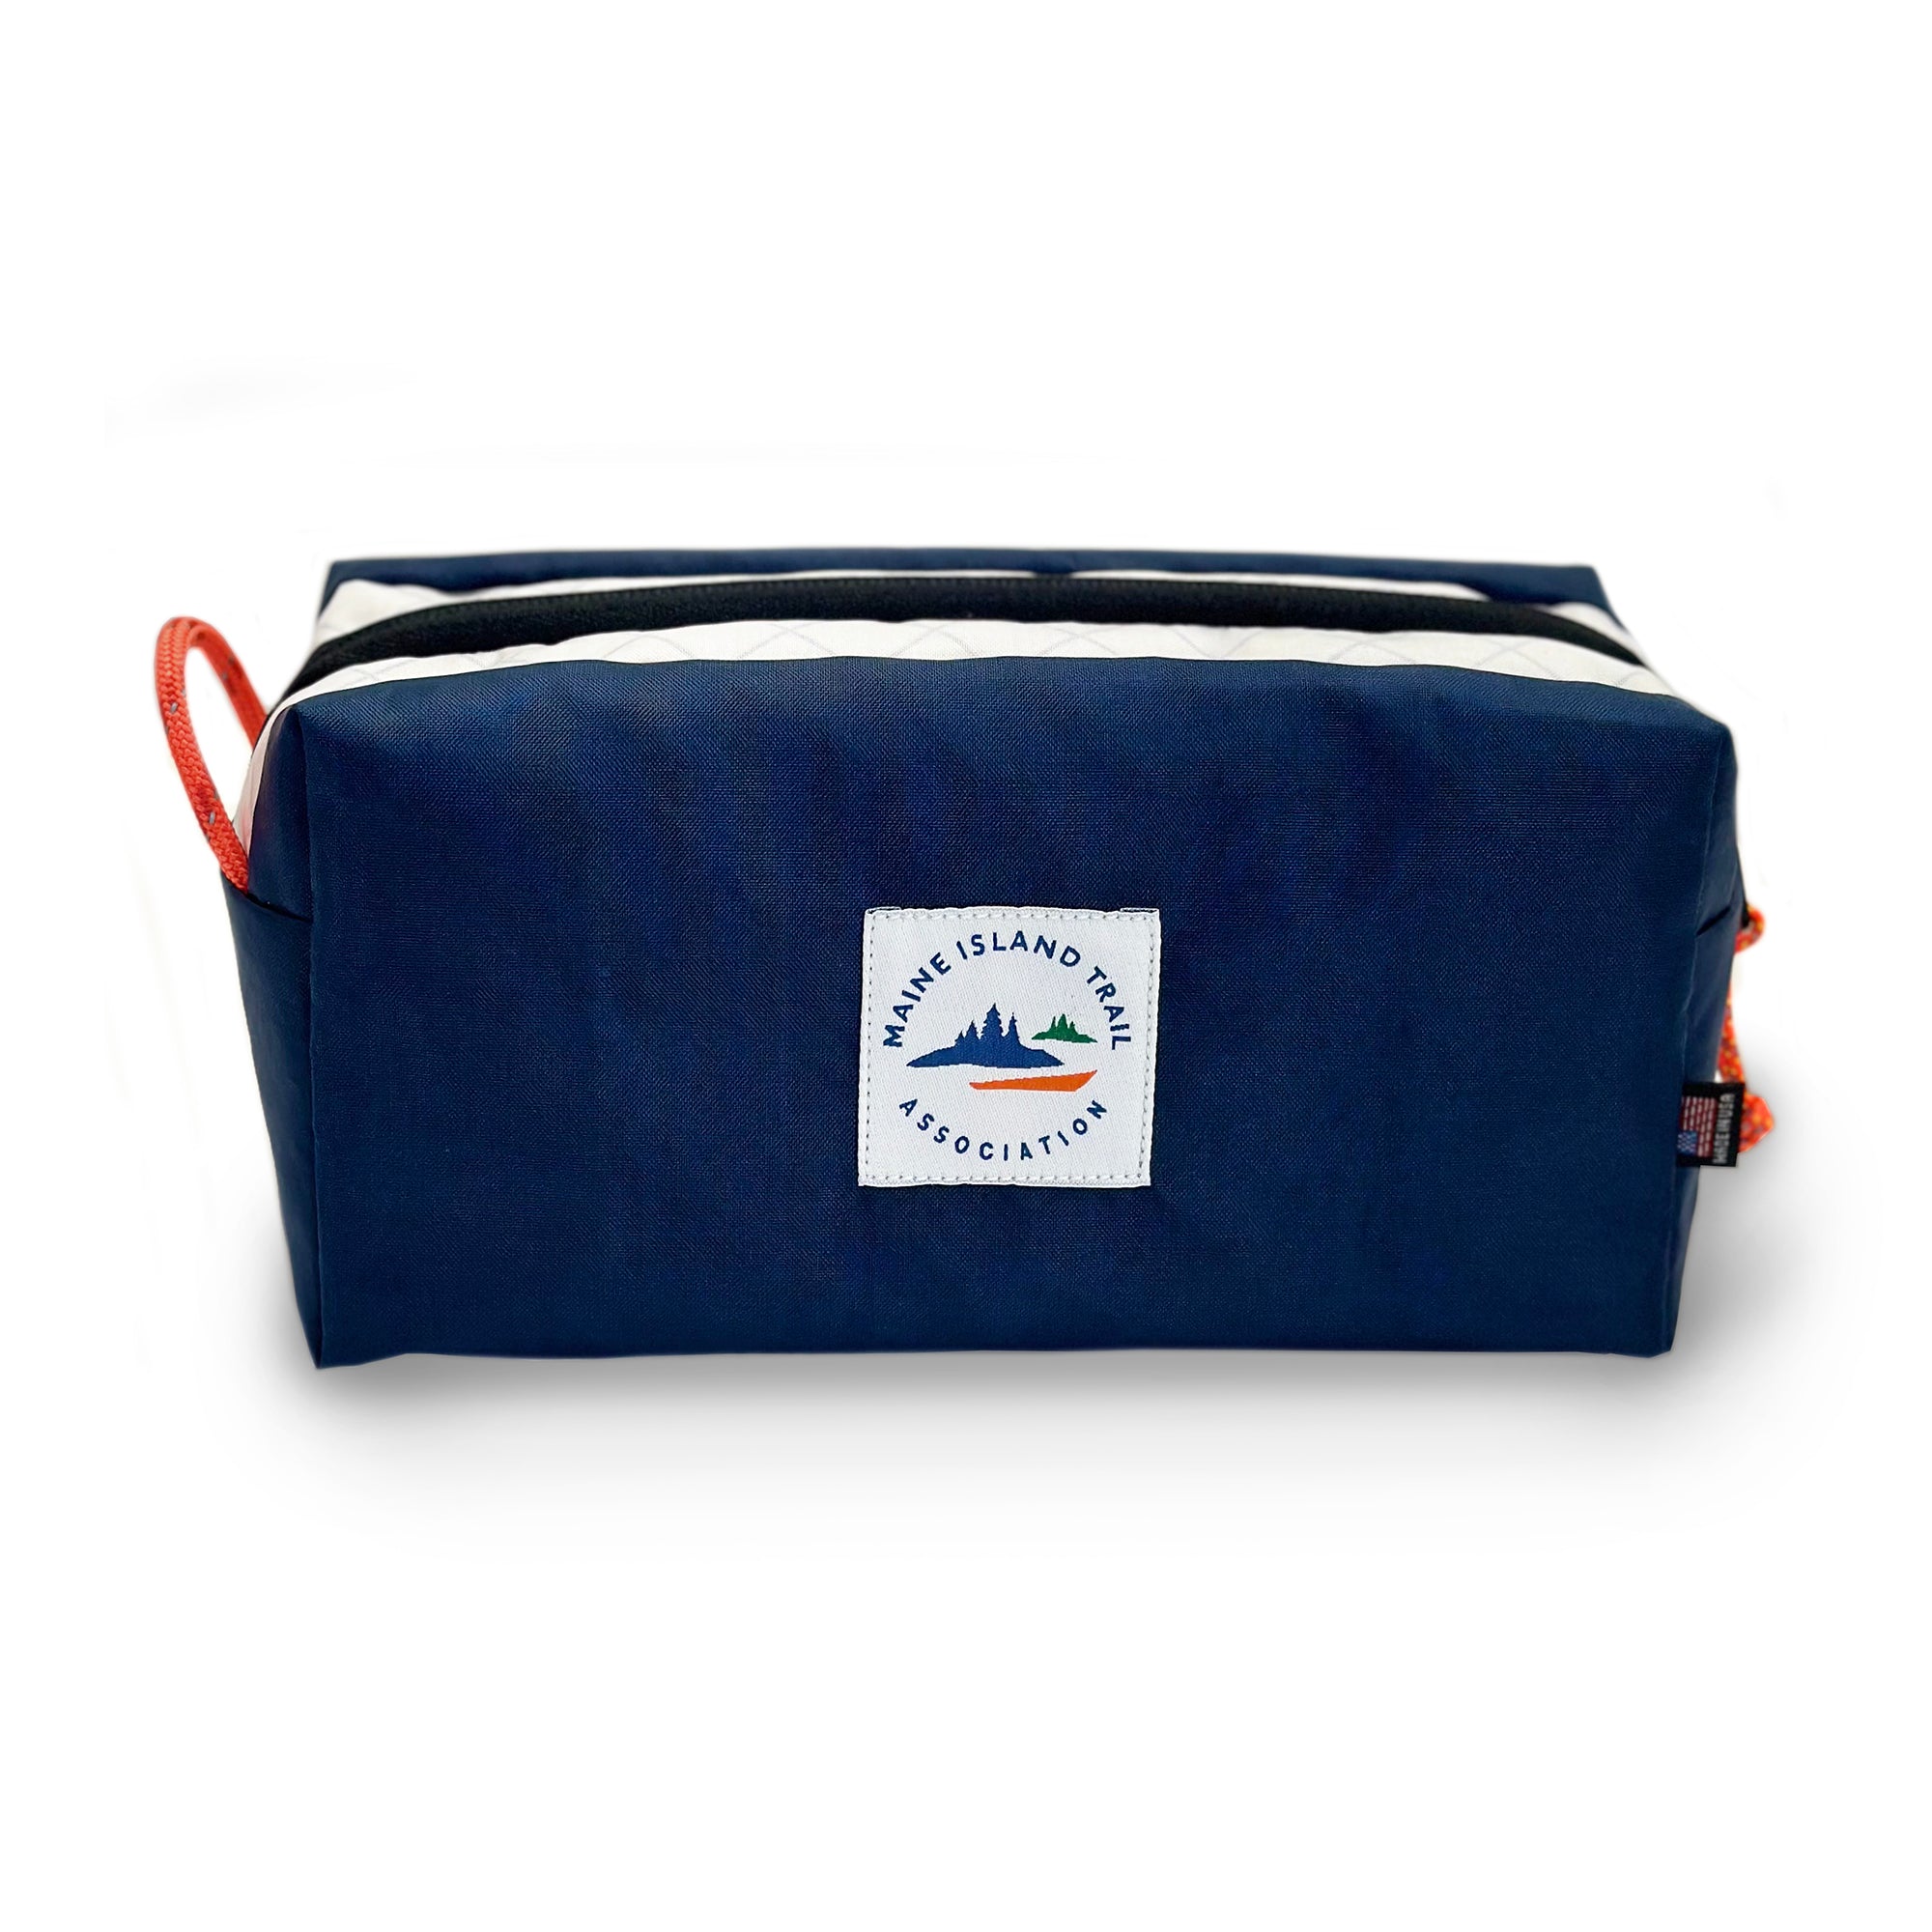 Flowfold Expedition Briefcase, EcoPak: Recycled Navy